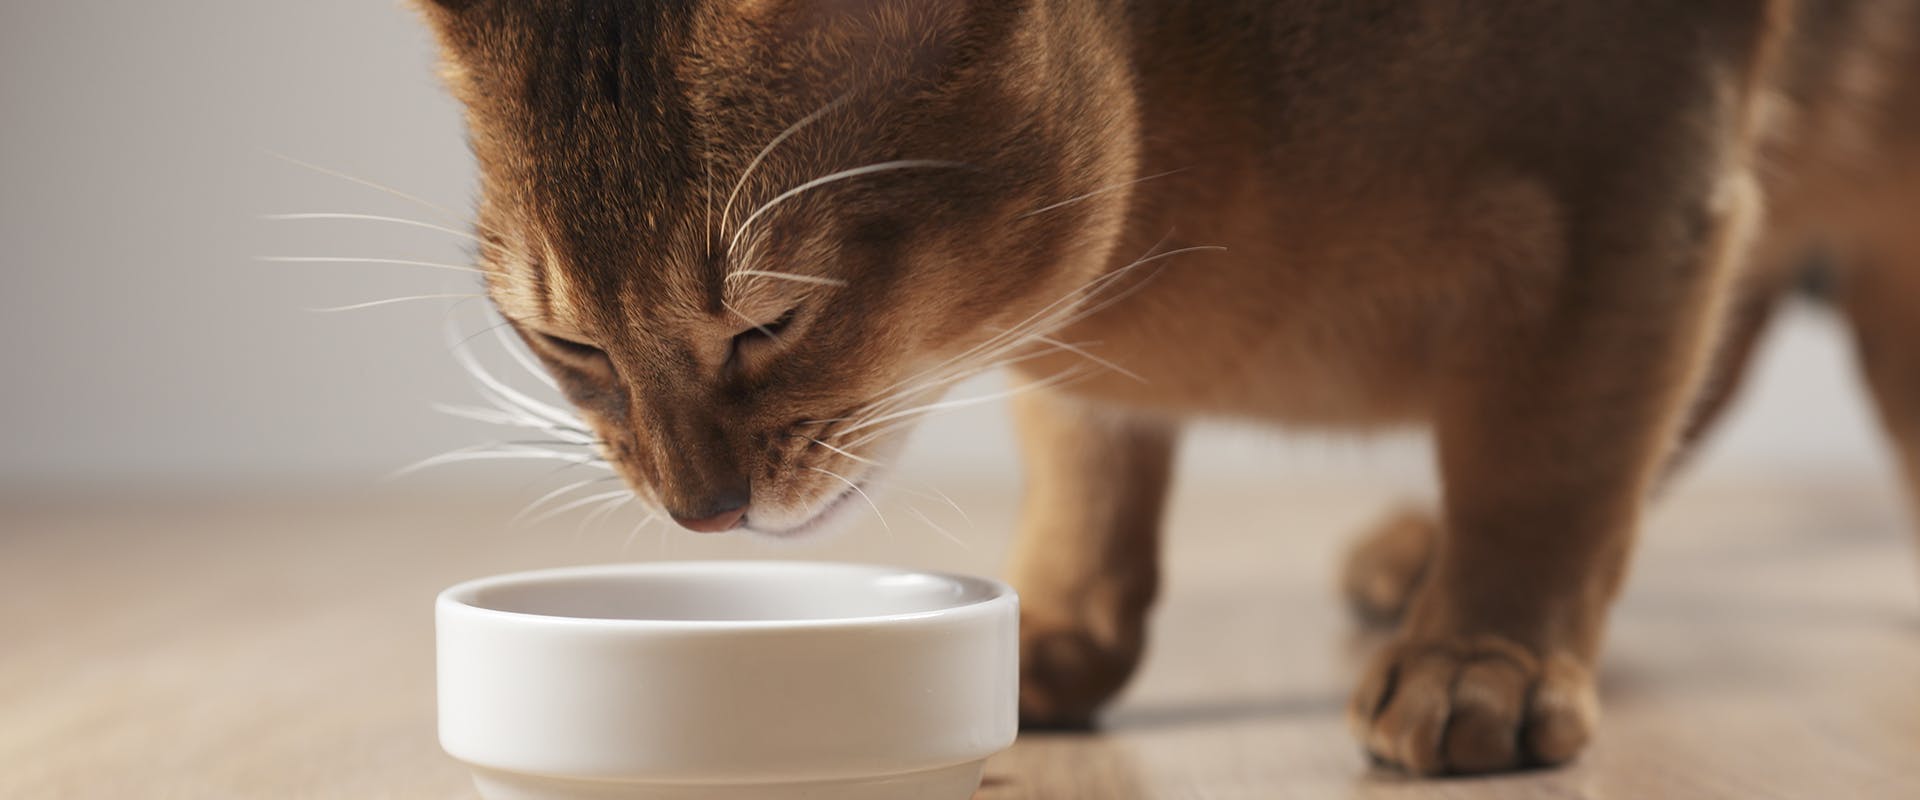 A cat eating from a white bowl